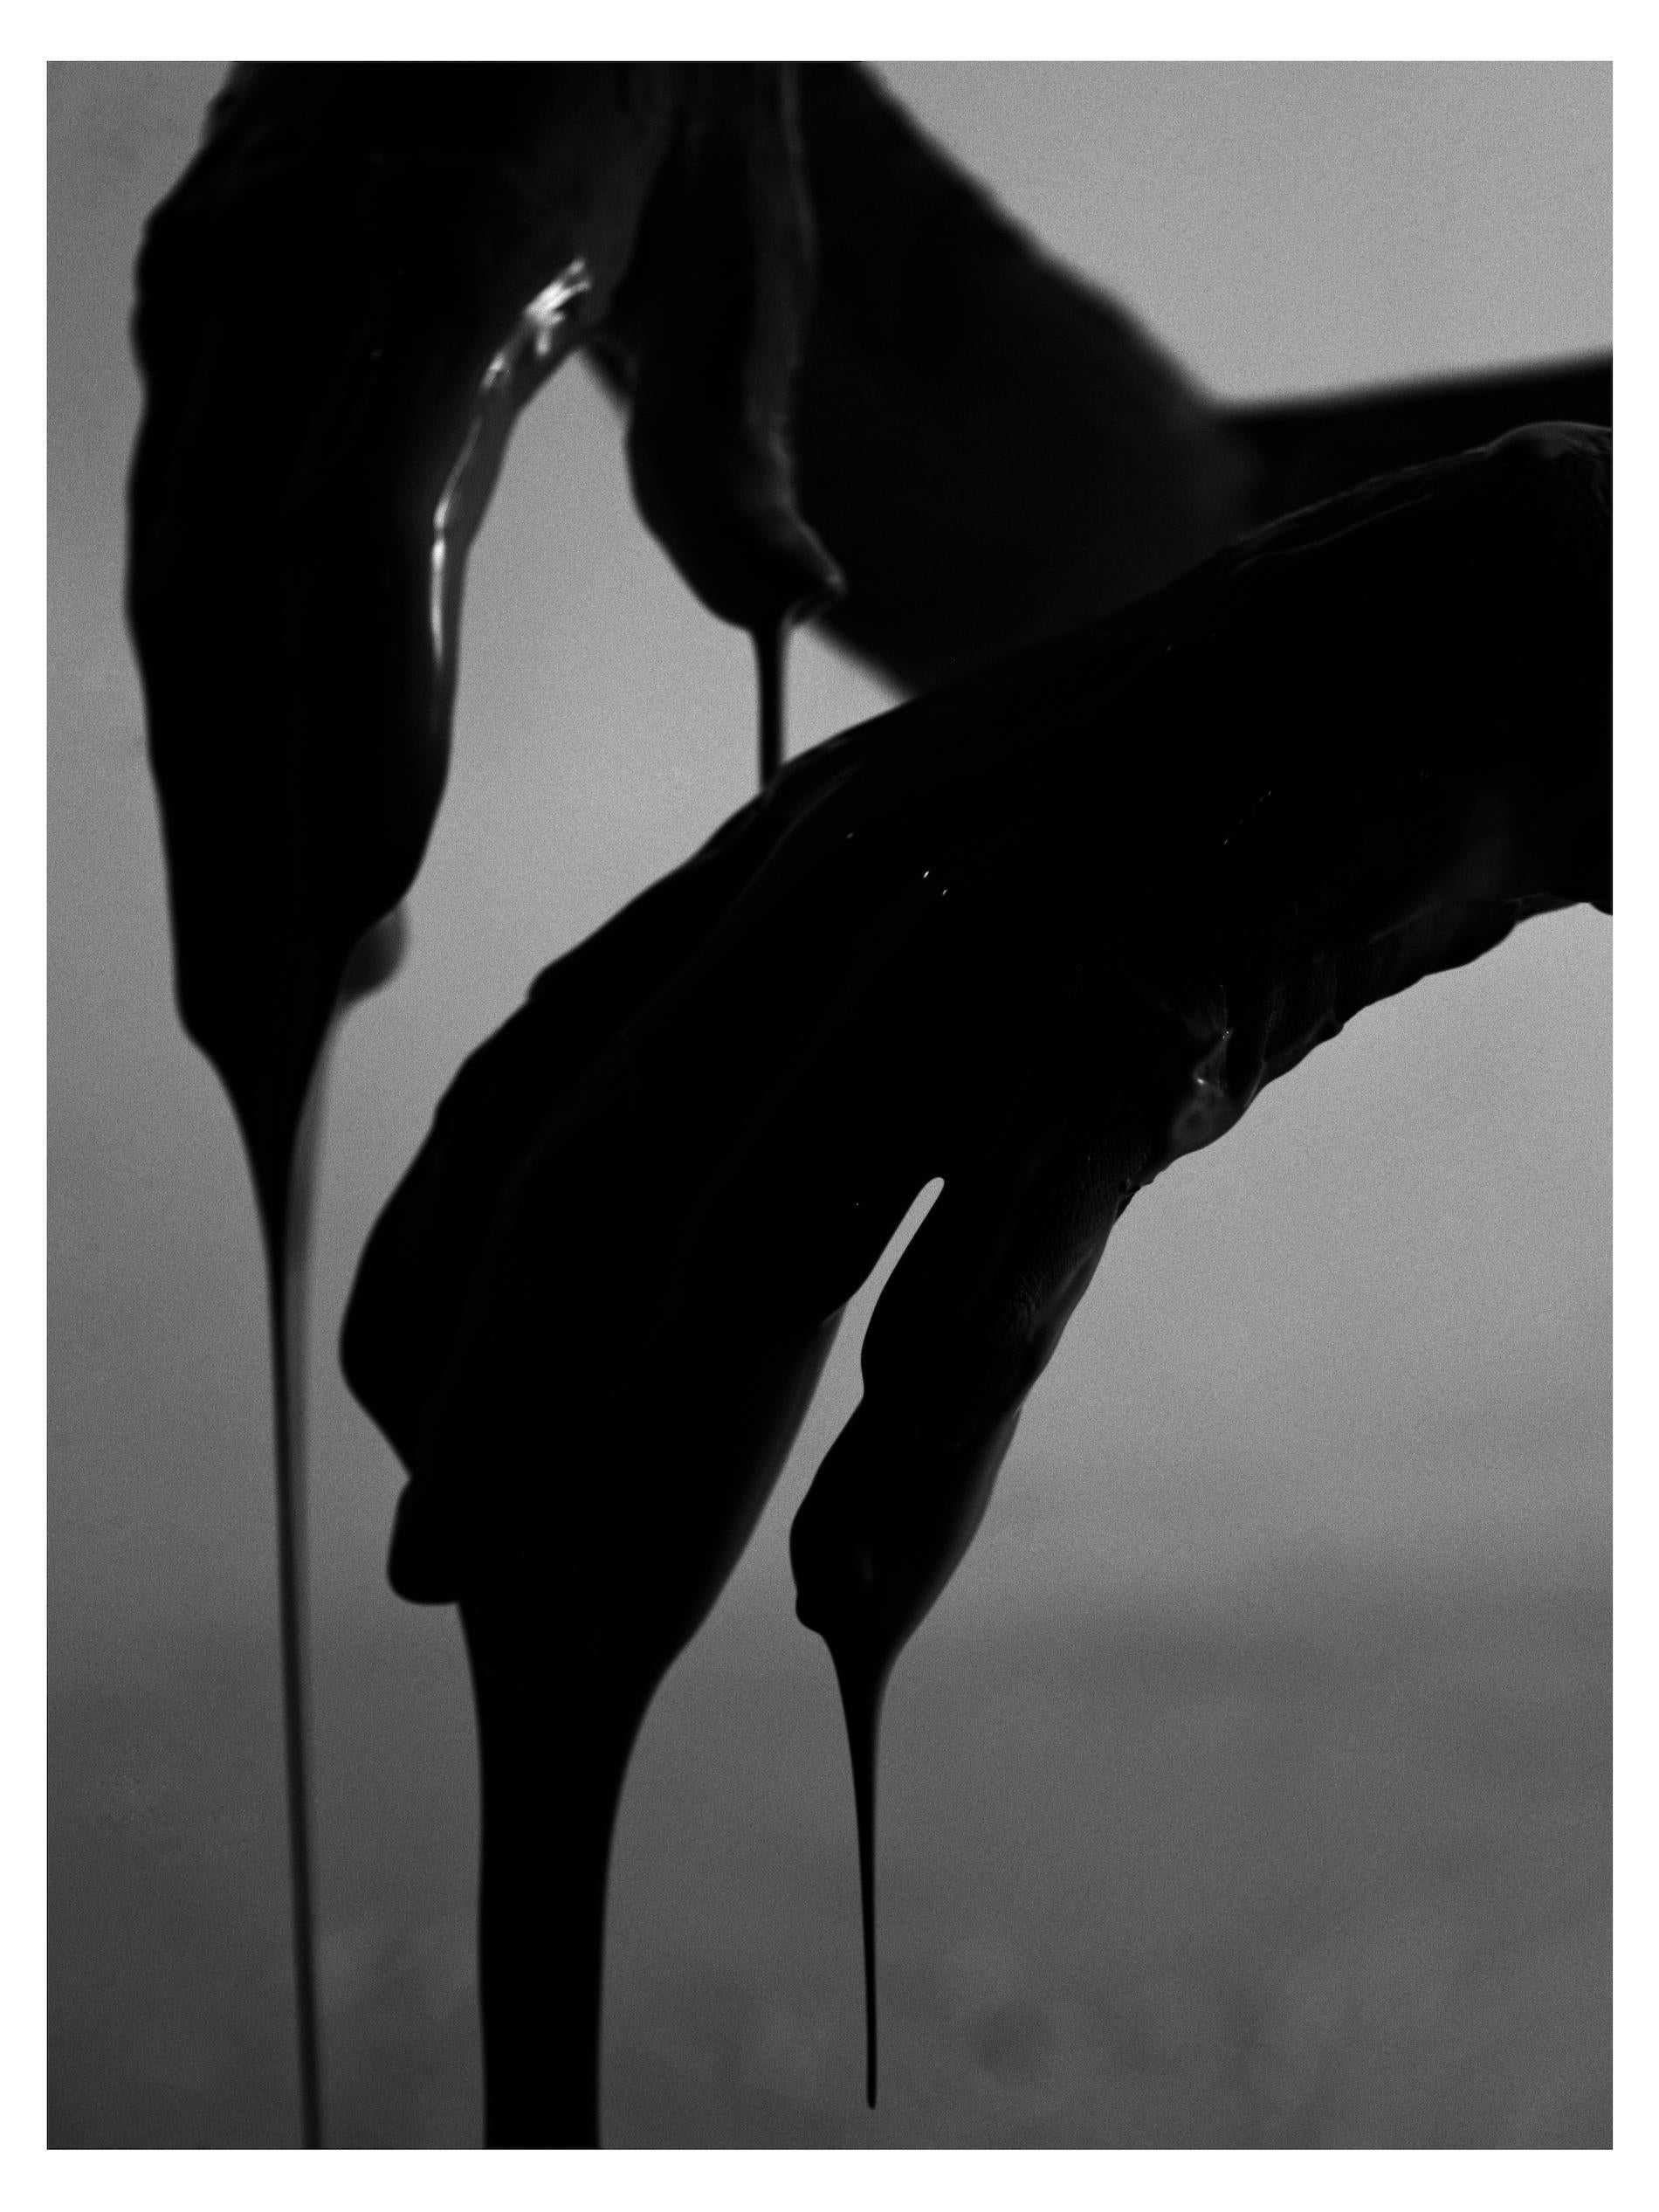 "DRIP 2" Photography 24" x 18" inch Edition 1/20 by Ben Cope 